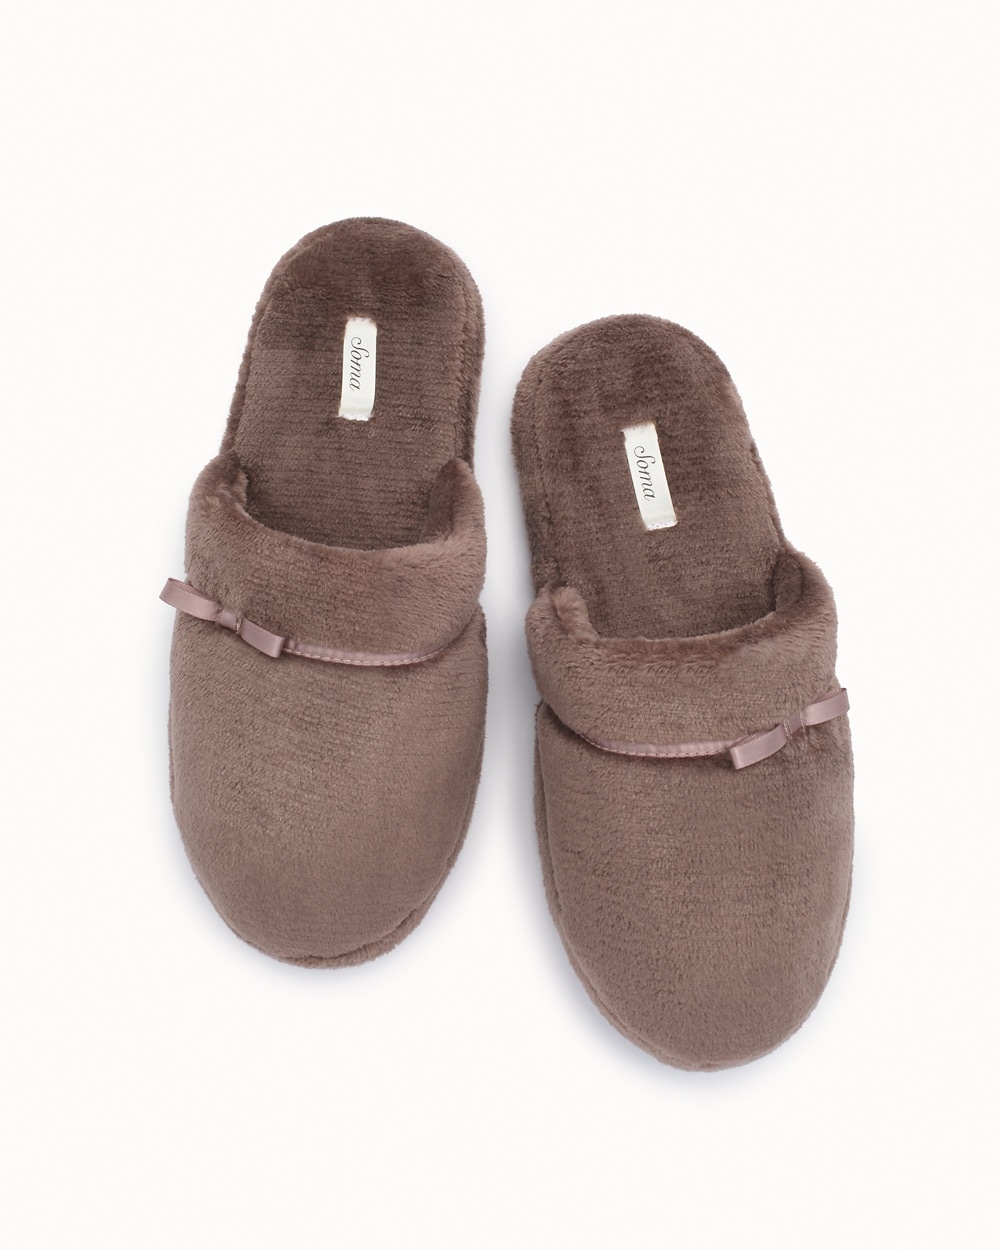 Embraceable Plush Slippers Mochaccino